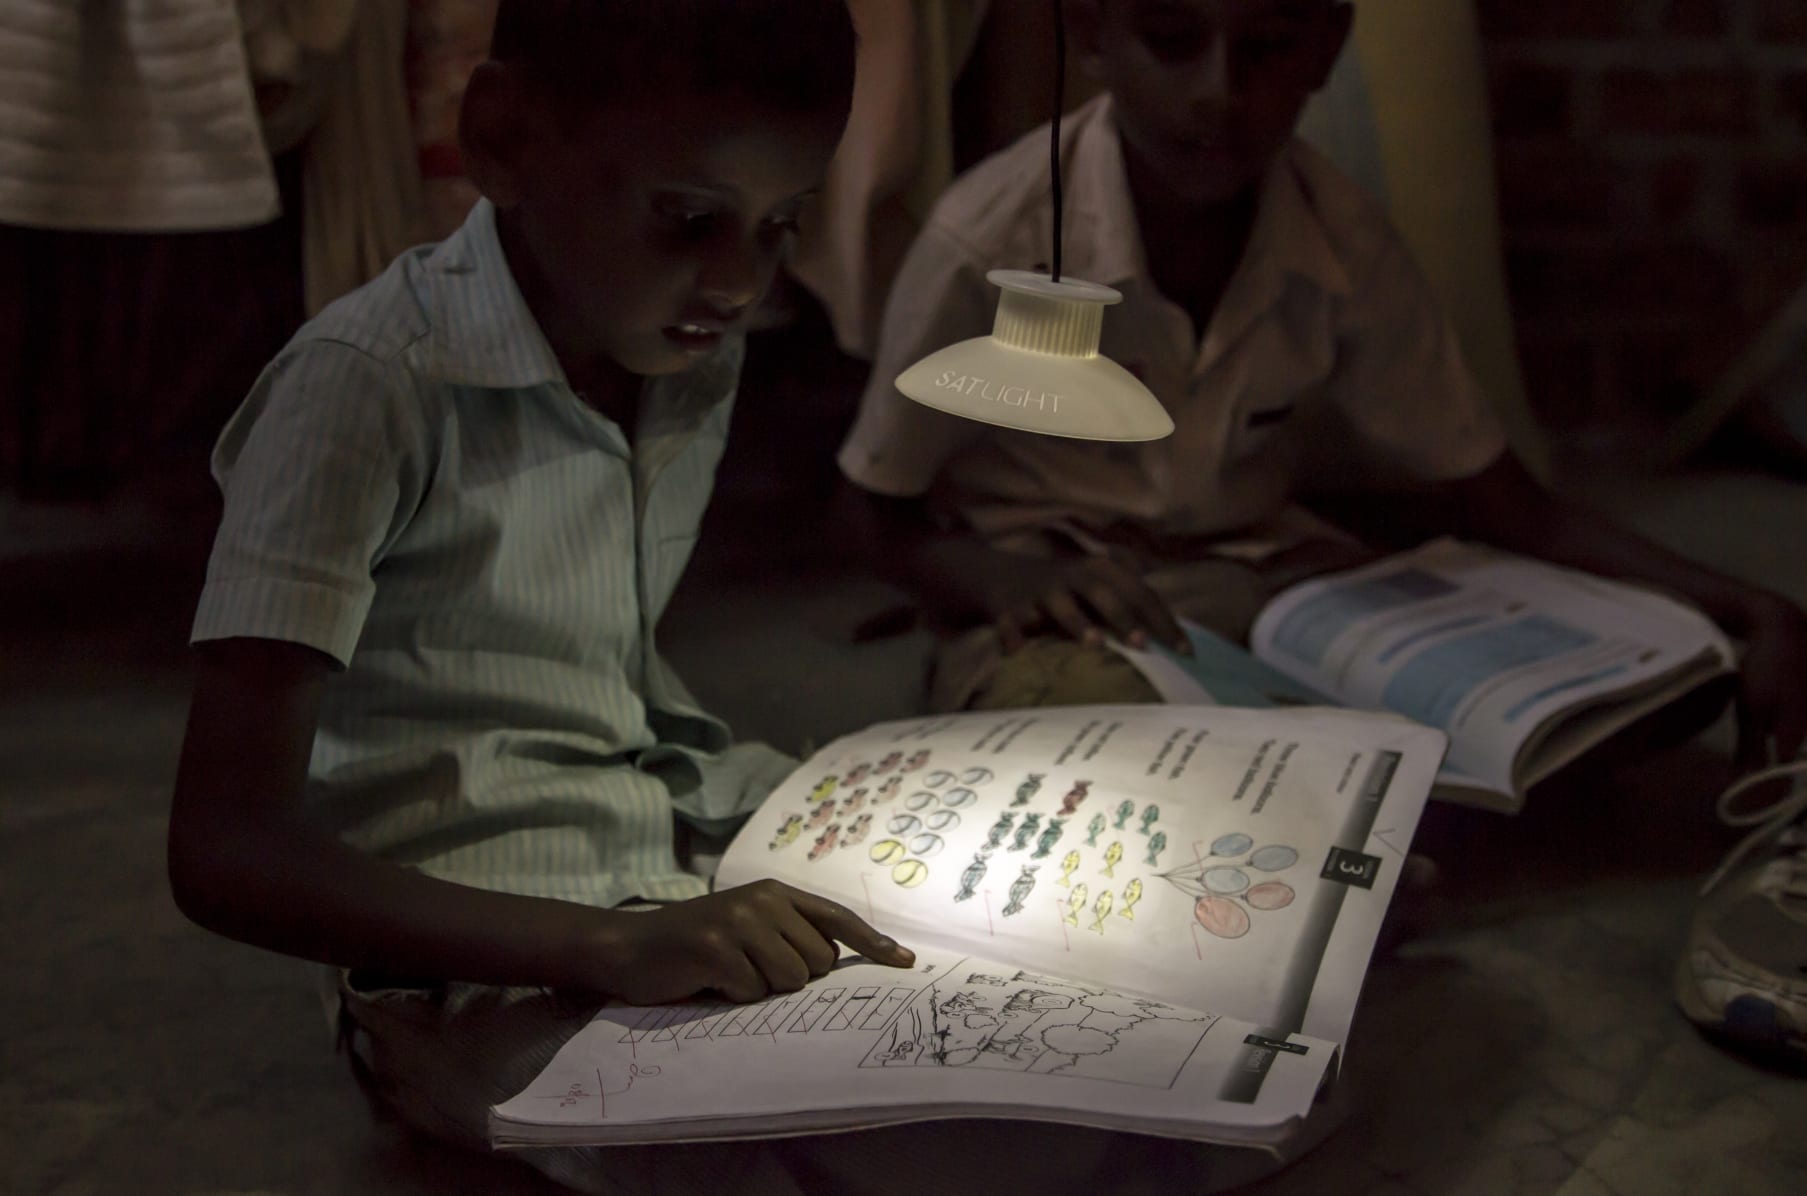 Gravity Light: Light for Developing Countries